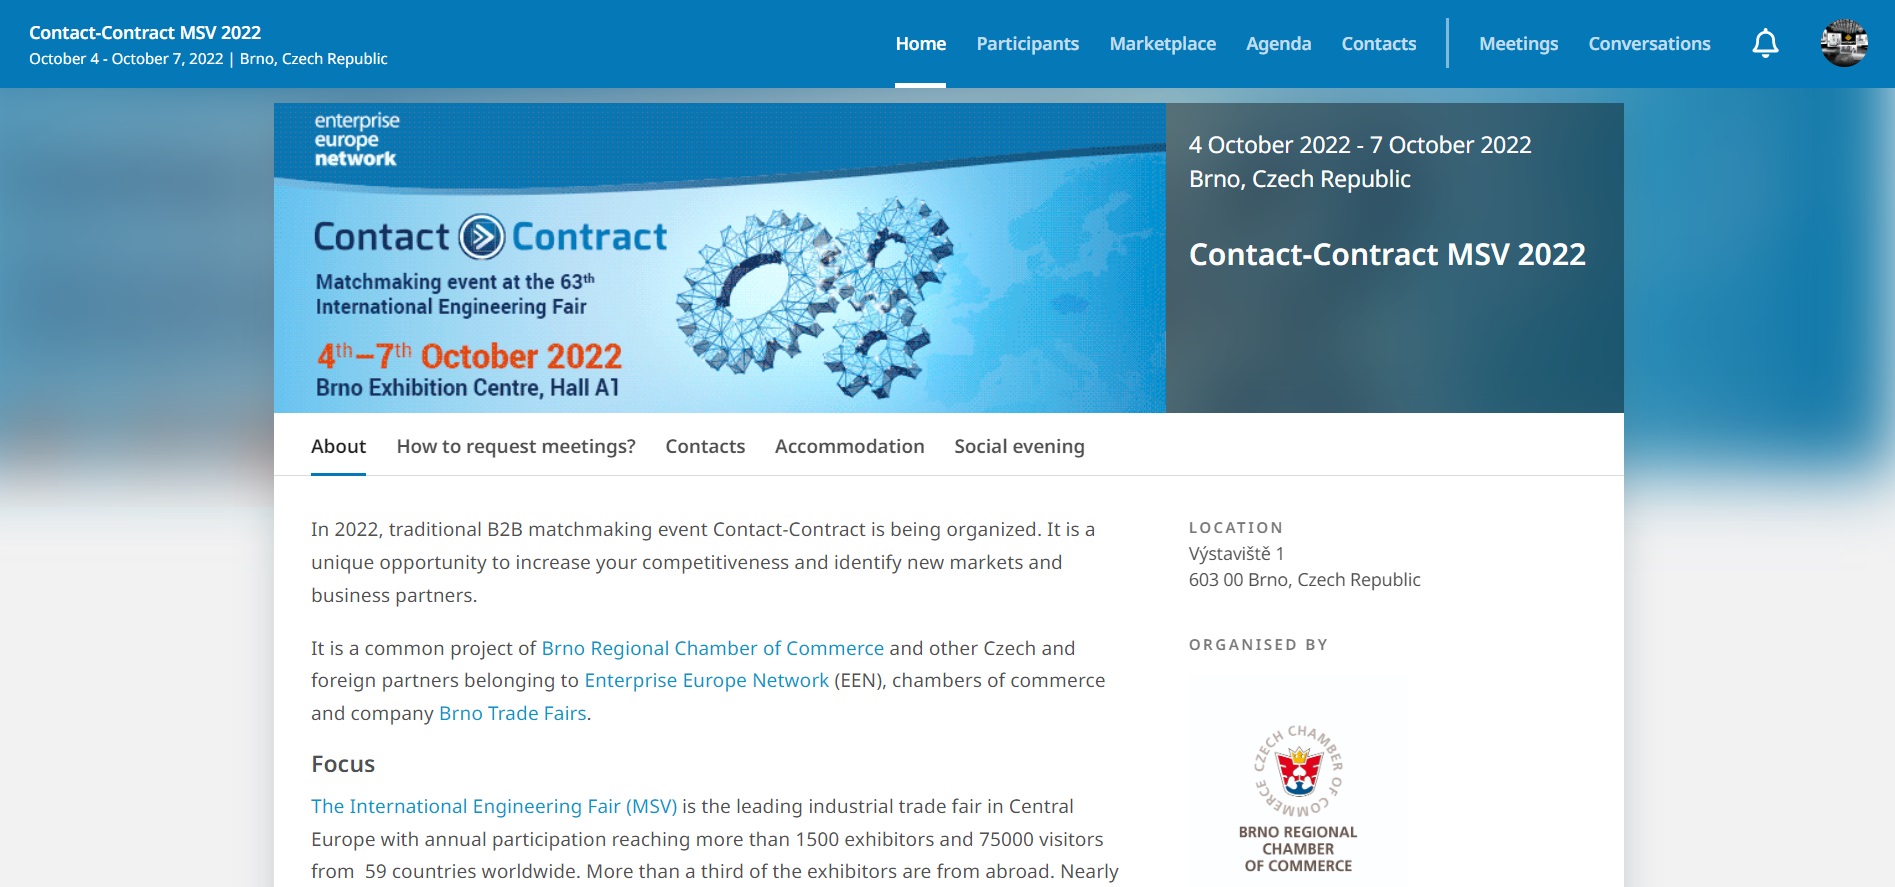 Contact-Contract MSV 2022